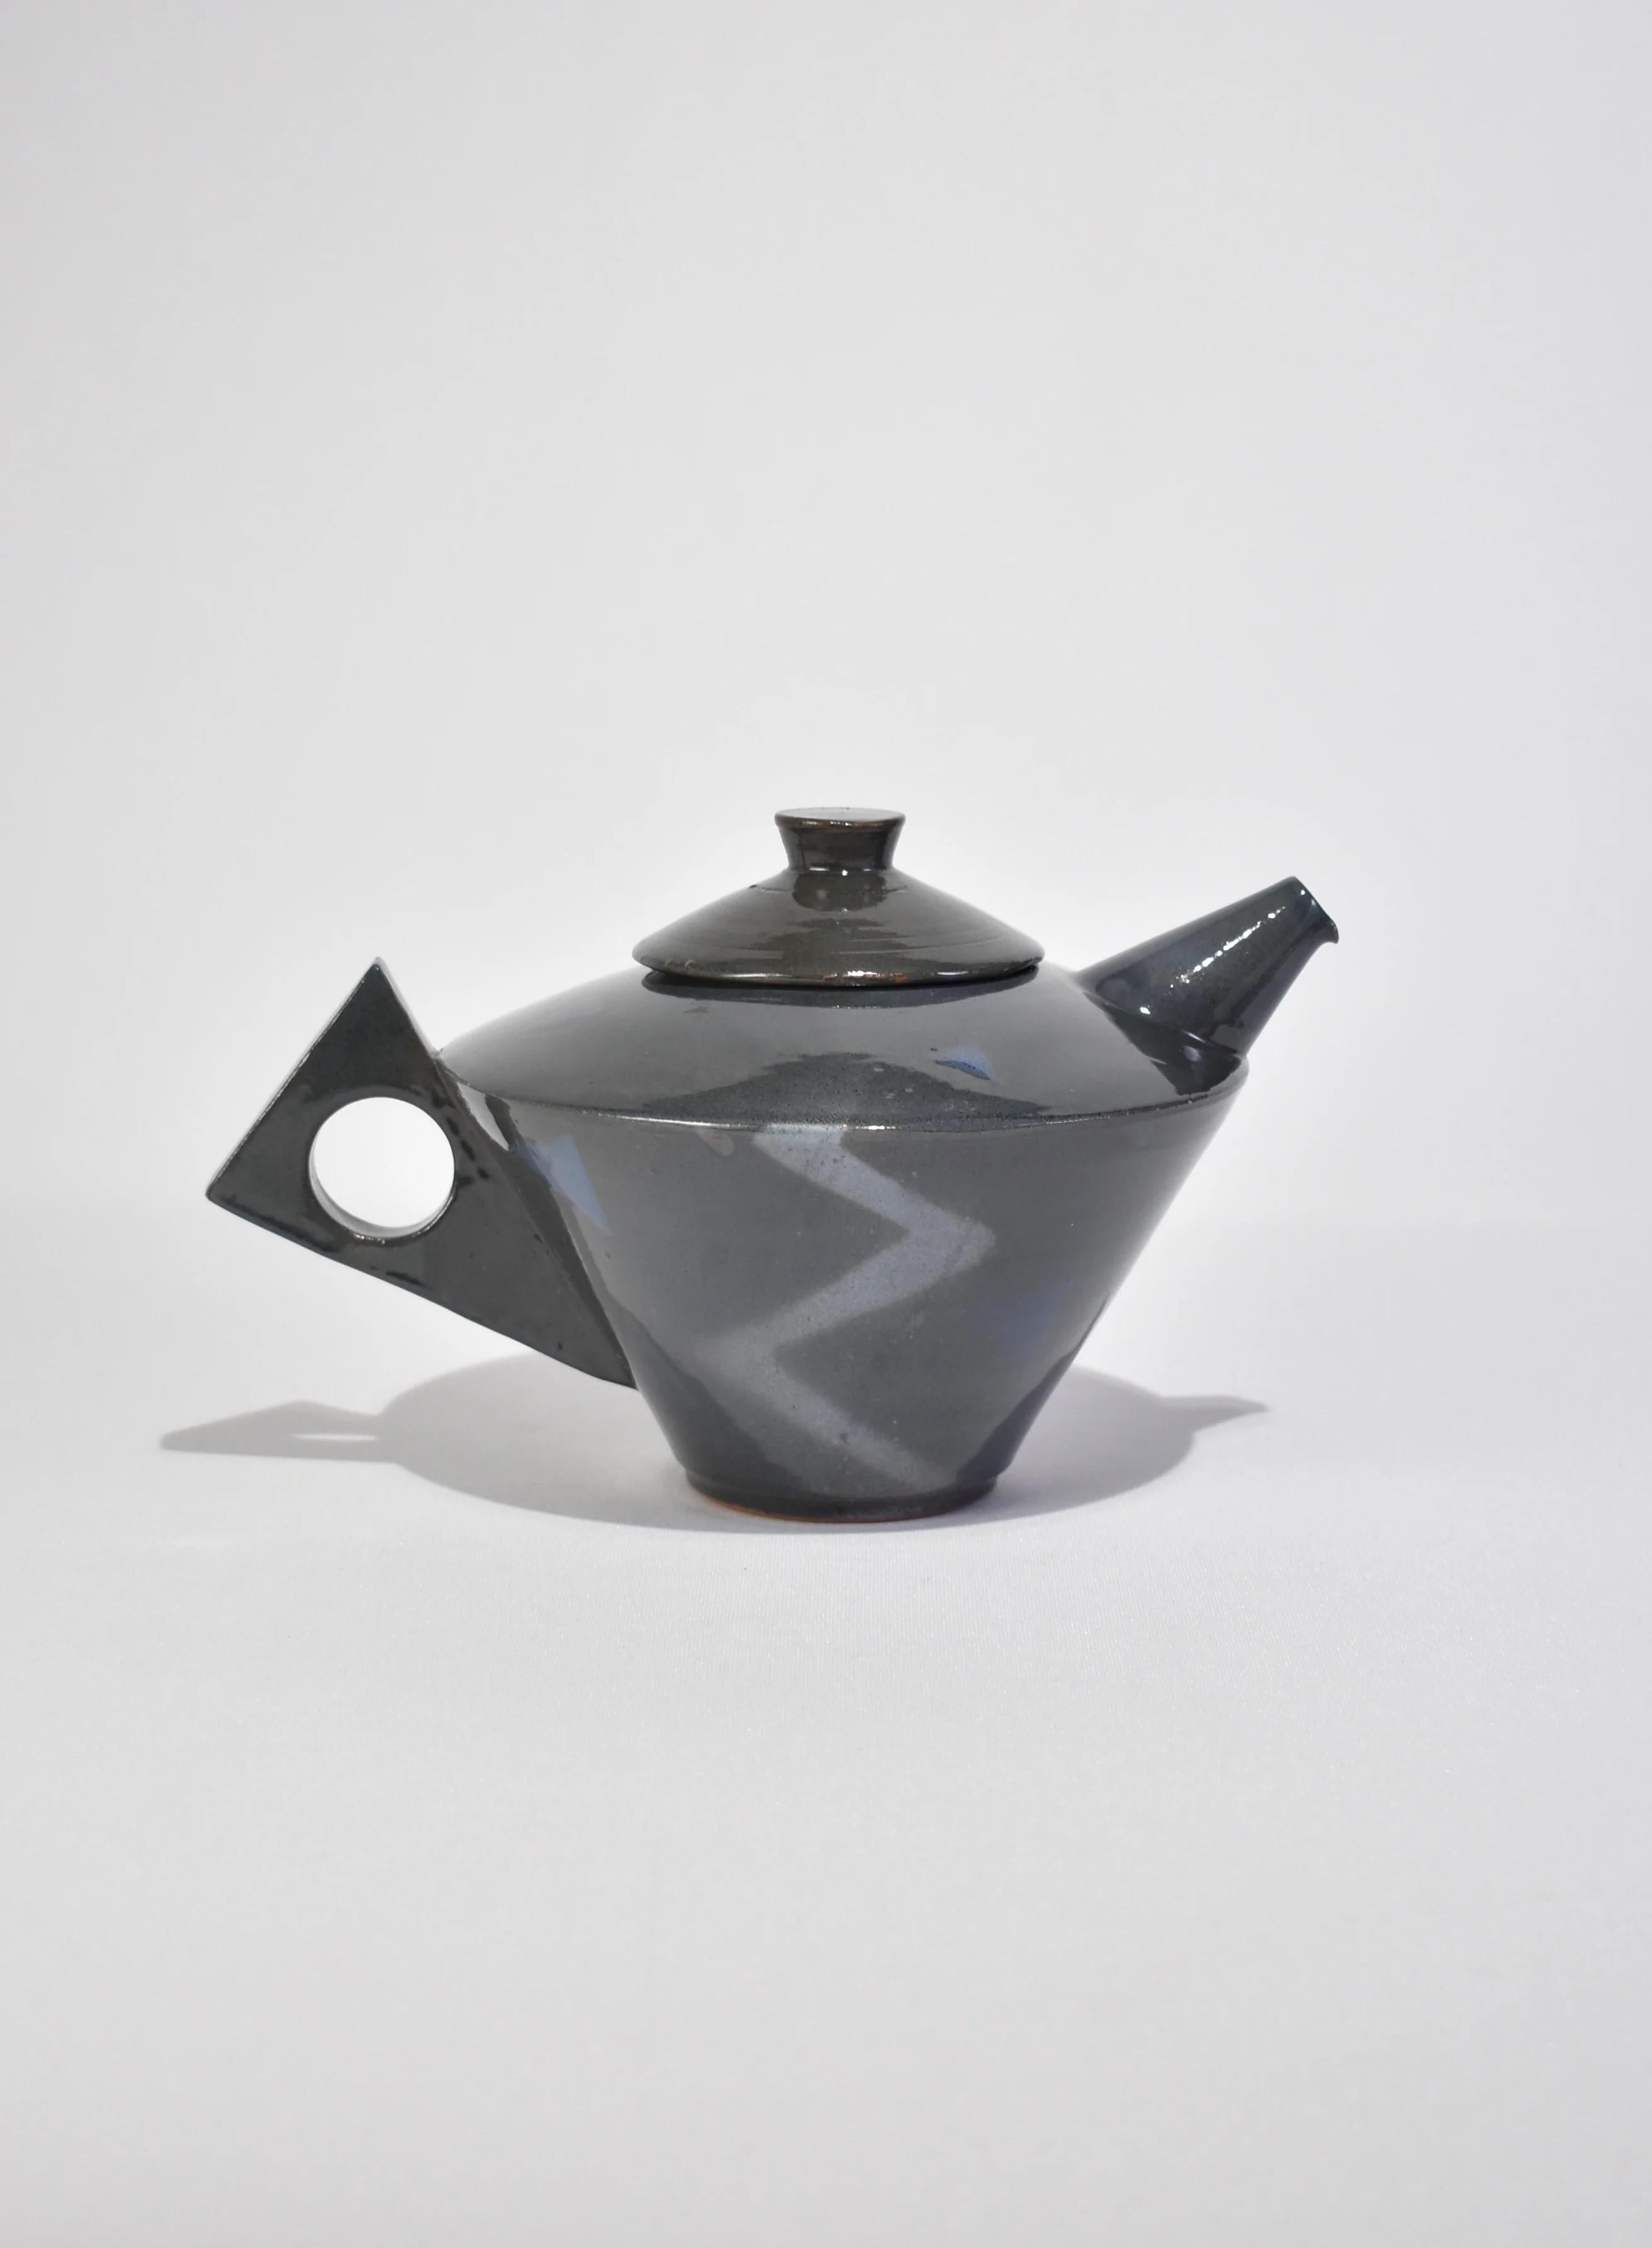 Vintage, handmade postmodern ceramic teapot in slate grey with a sculptural handle. Signed on base.